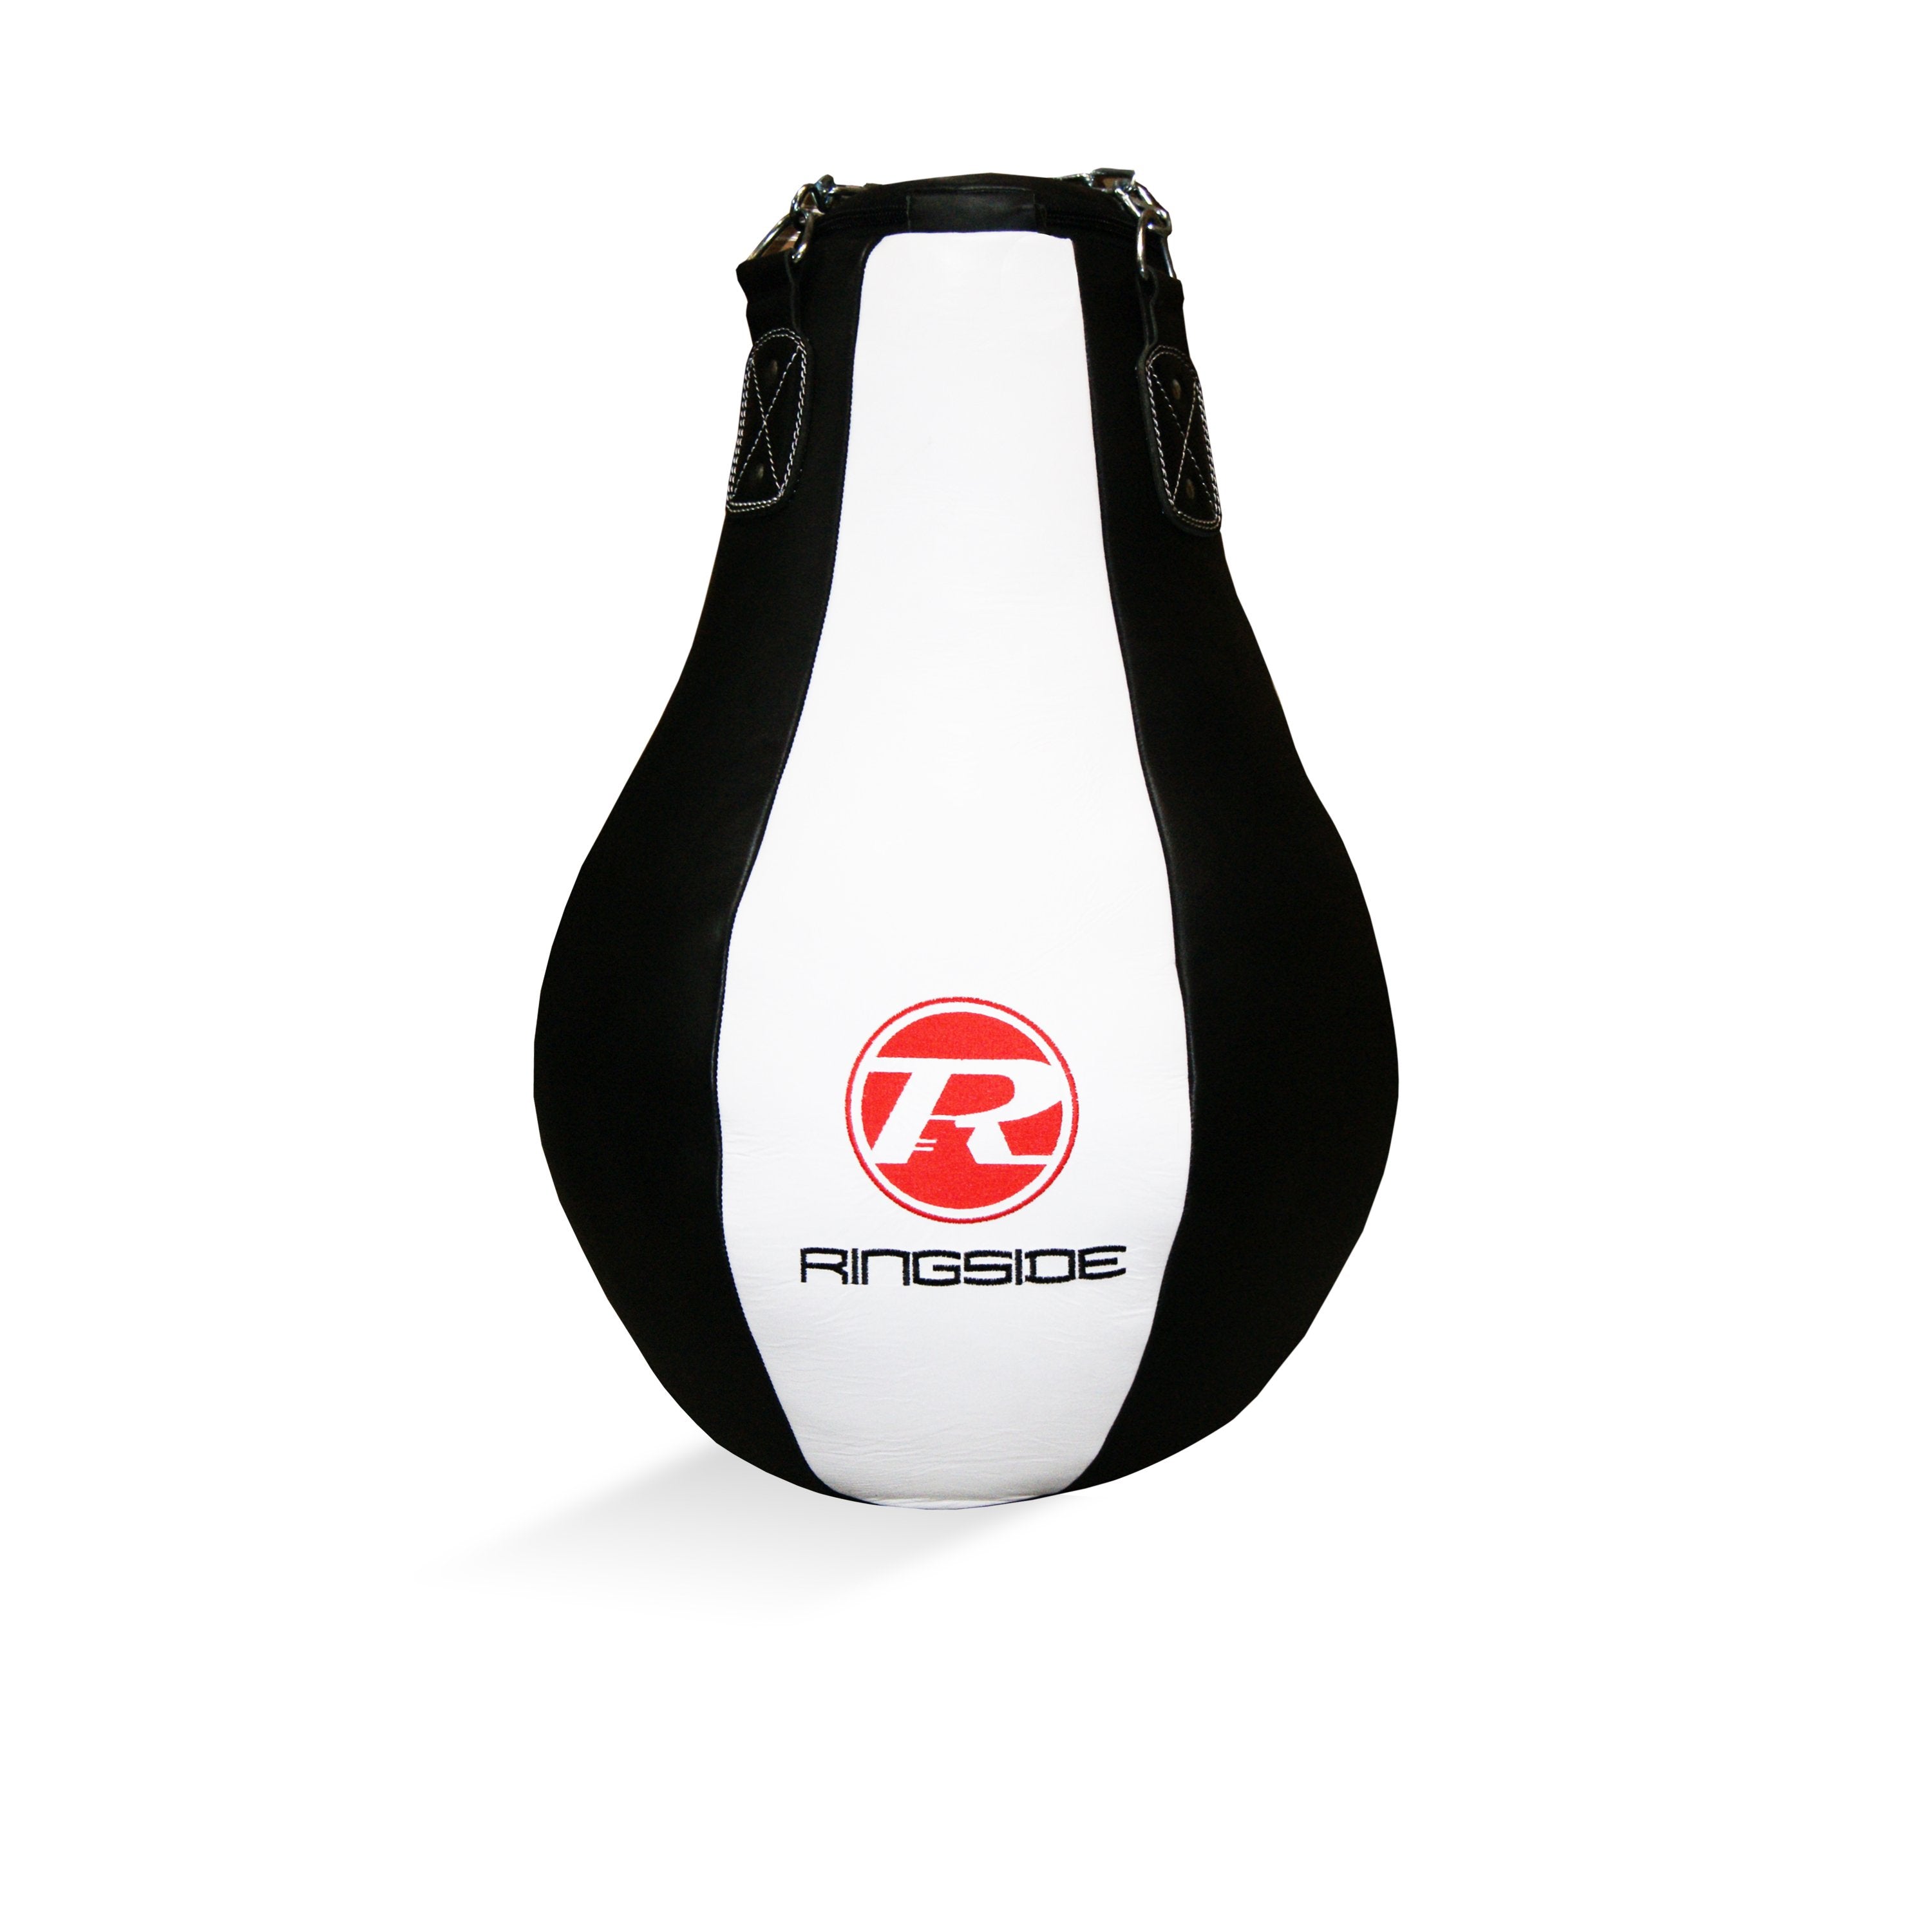 Maize Buffalo Leather Punch Bag - Black / White / Red